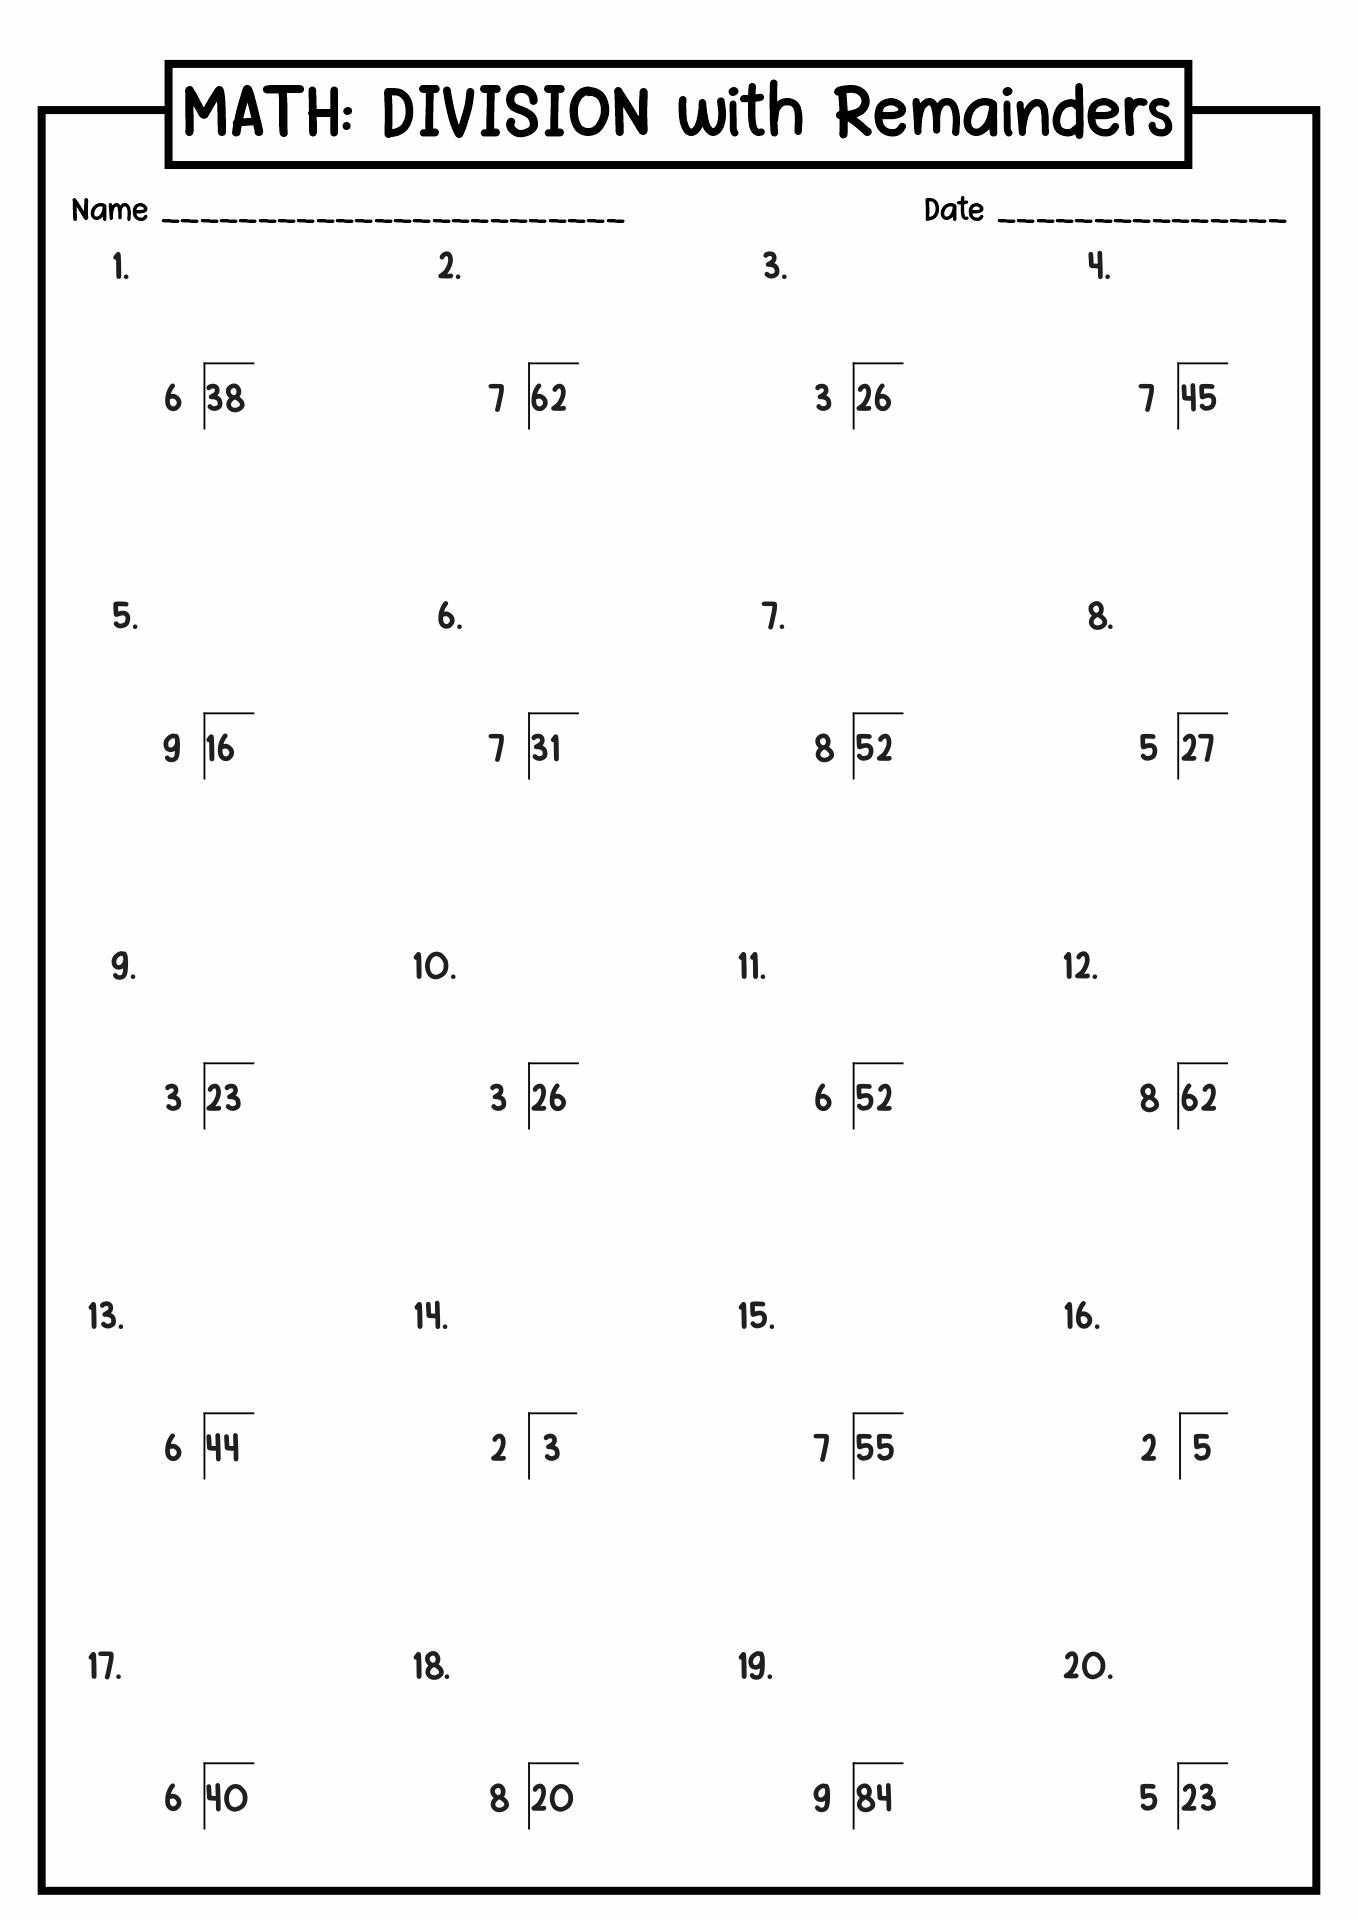 Division with Remainders Worksheets